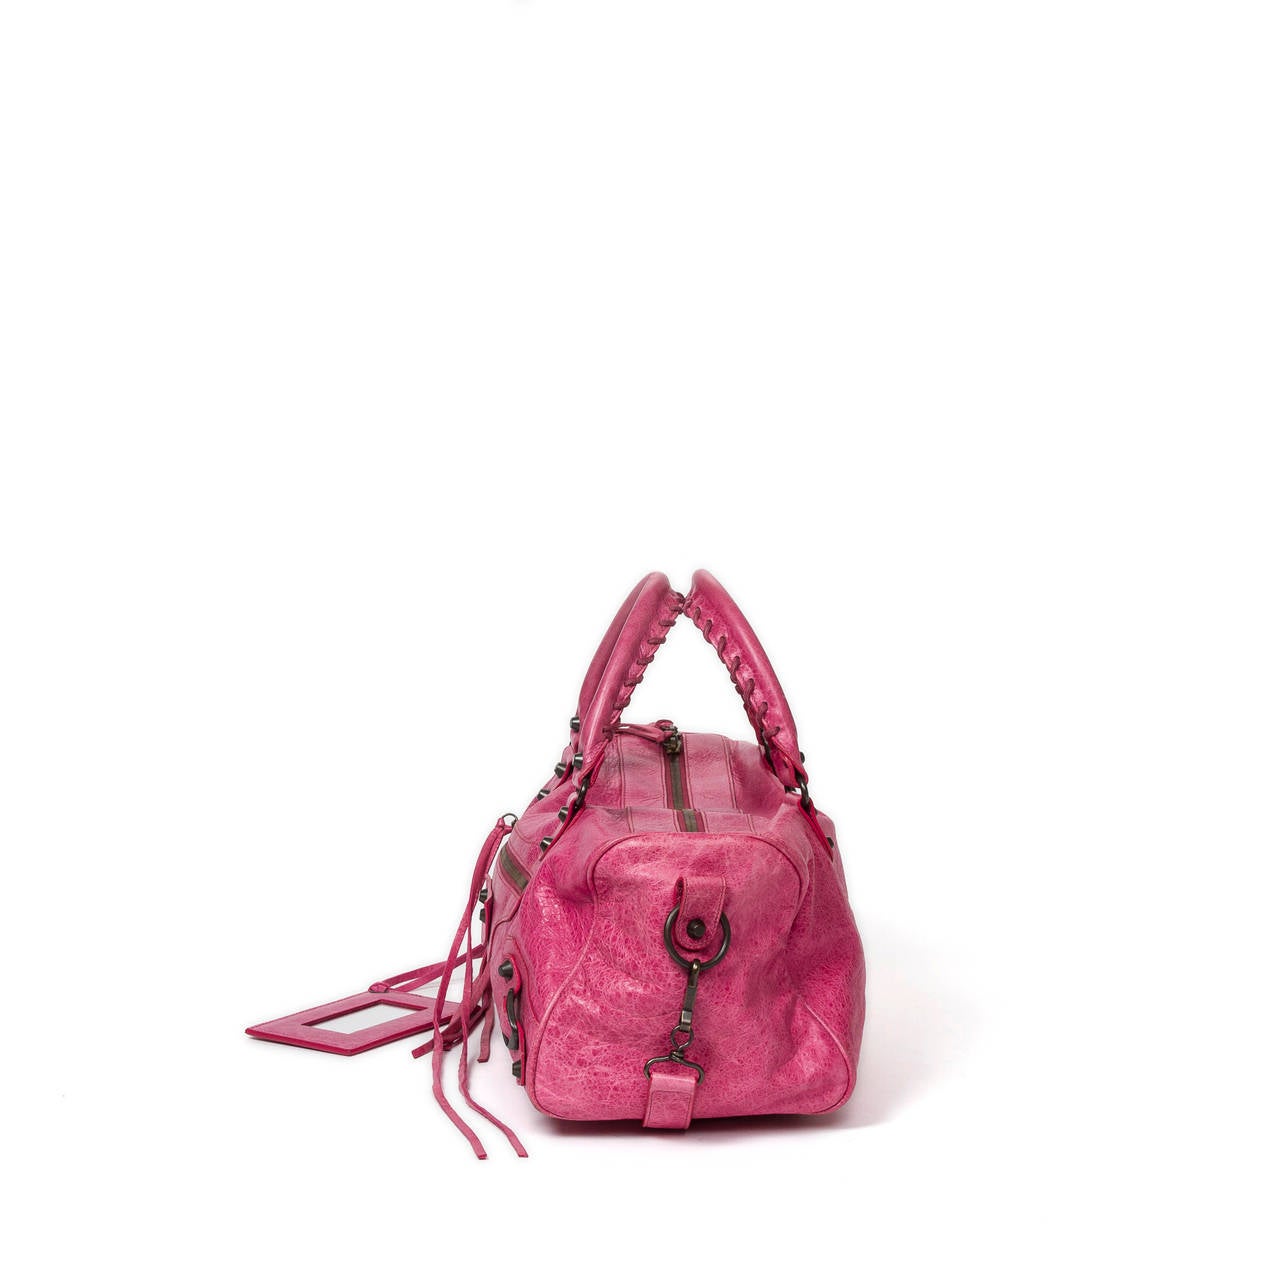 Balenciaga City Bag Pink Distressed Leather In Excellent Condition For Sale In Dublin, IE